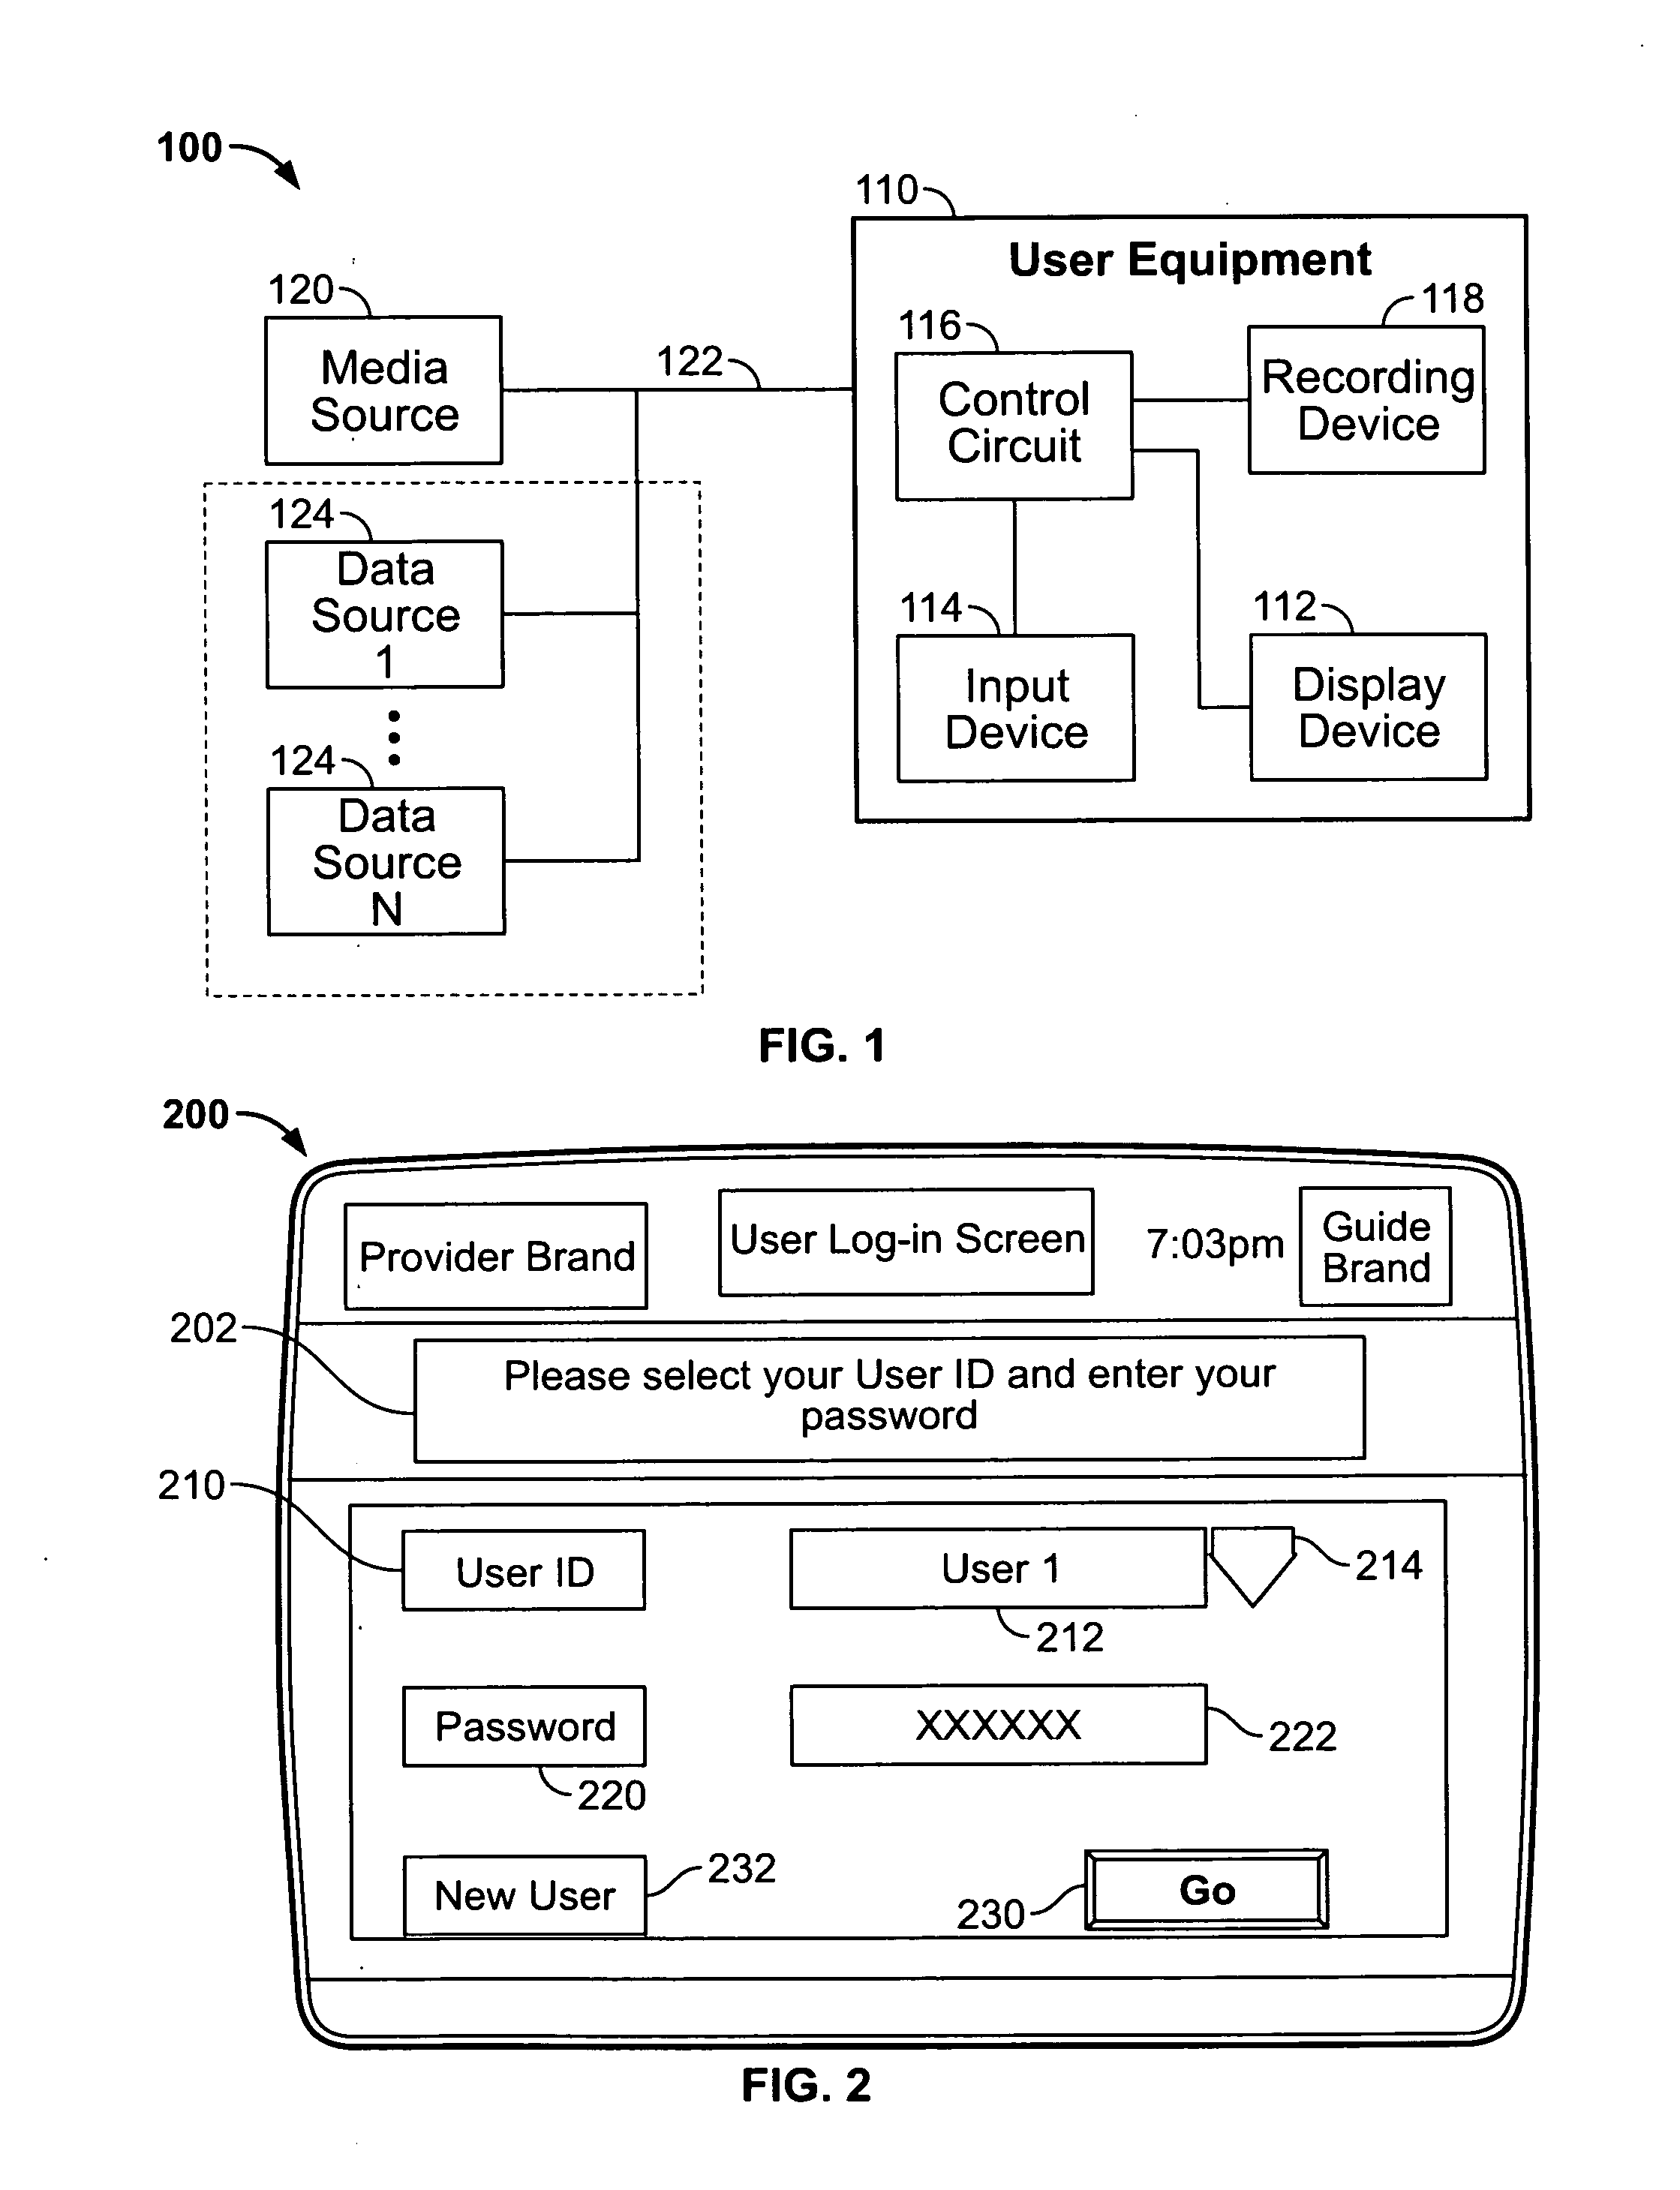 Storage management of a recording device in a multi-user system